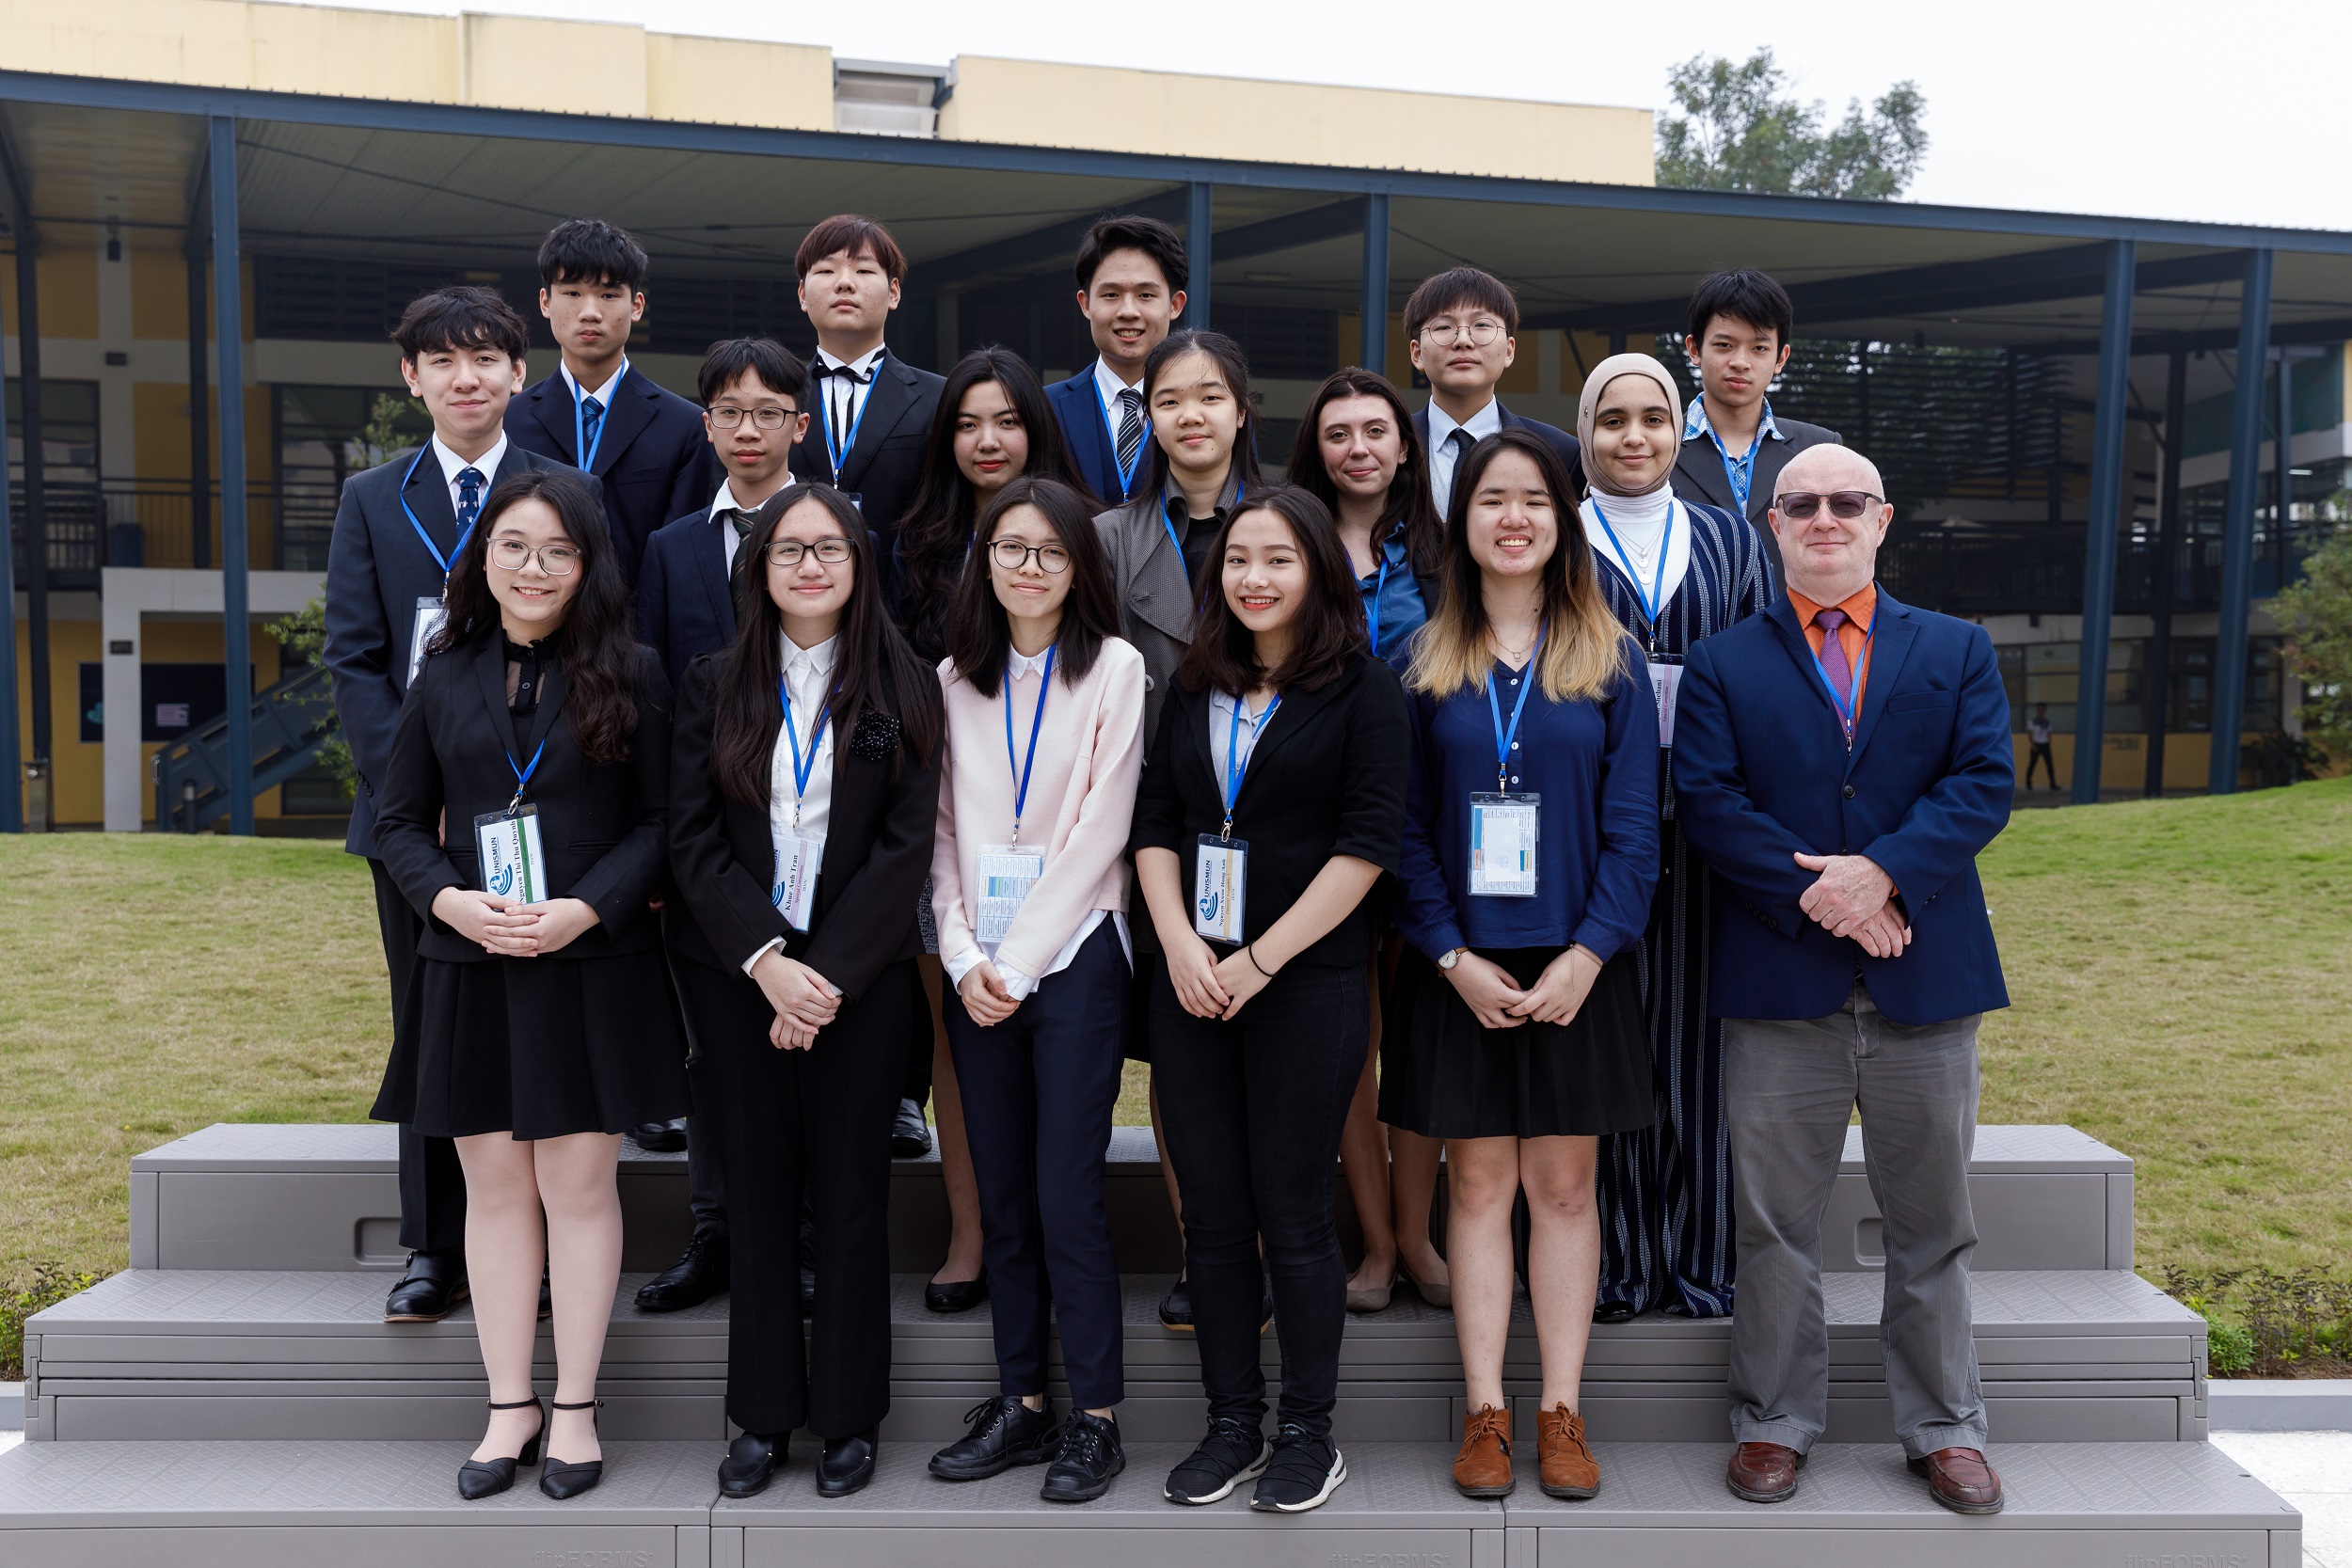 ISV delegation at another MUN conference